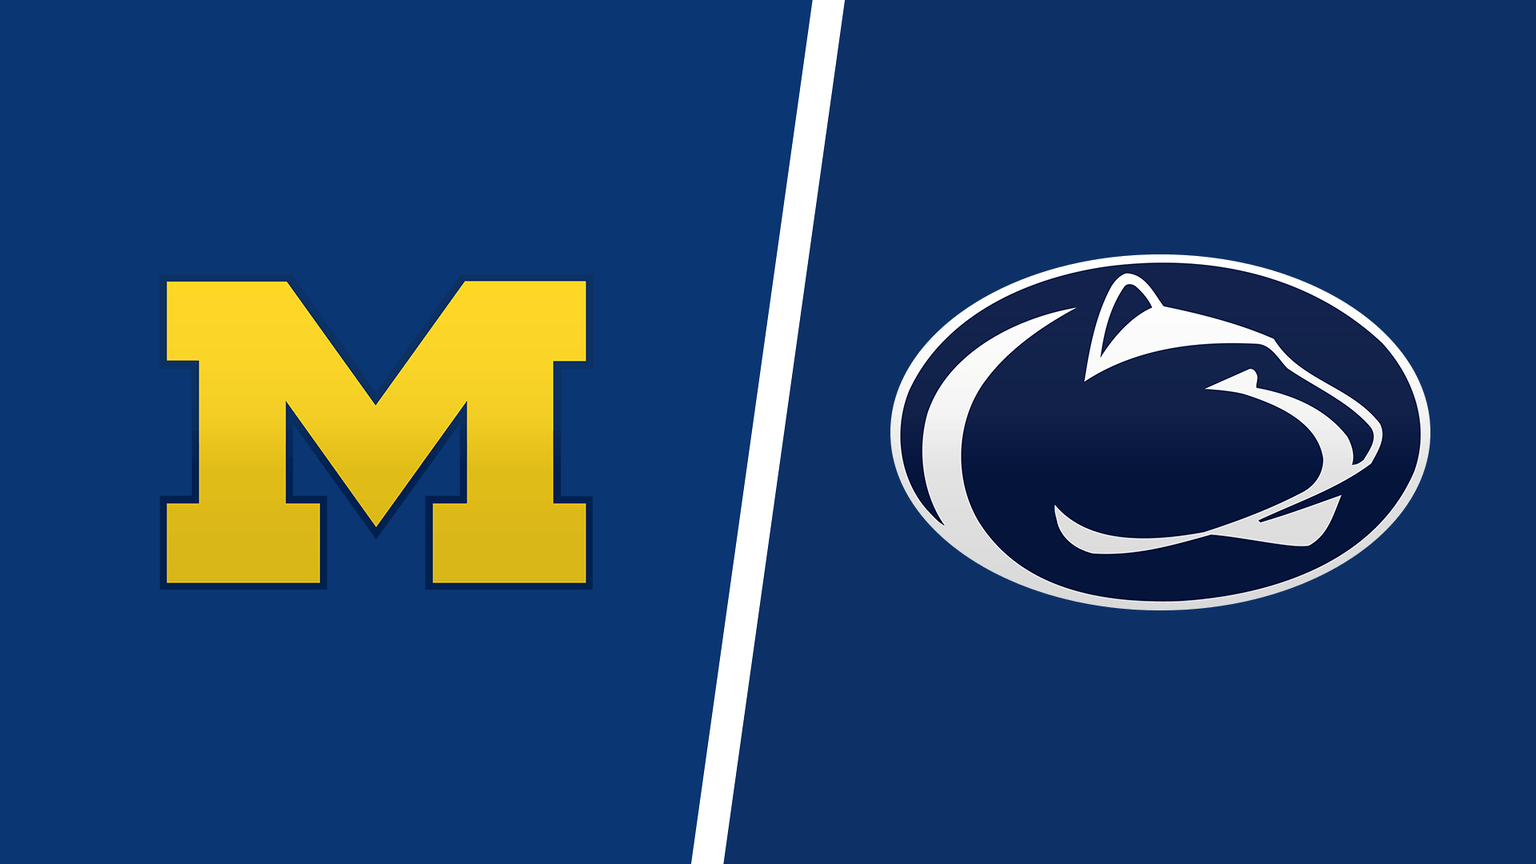 How to Watch Penn State vs. Michigan Live Online on October 15, 2022: TV Channels/Streaming